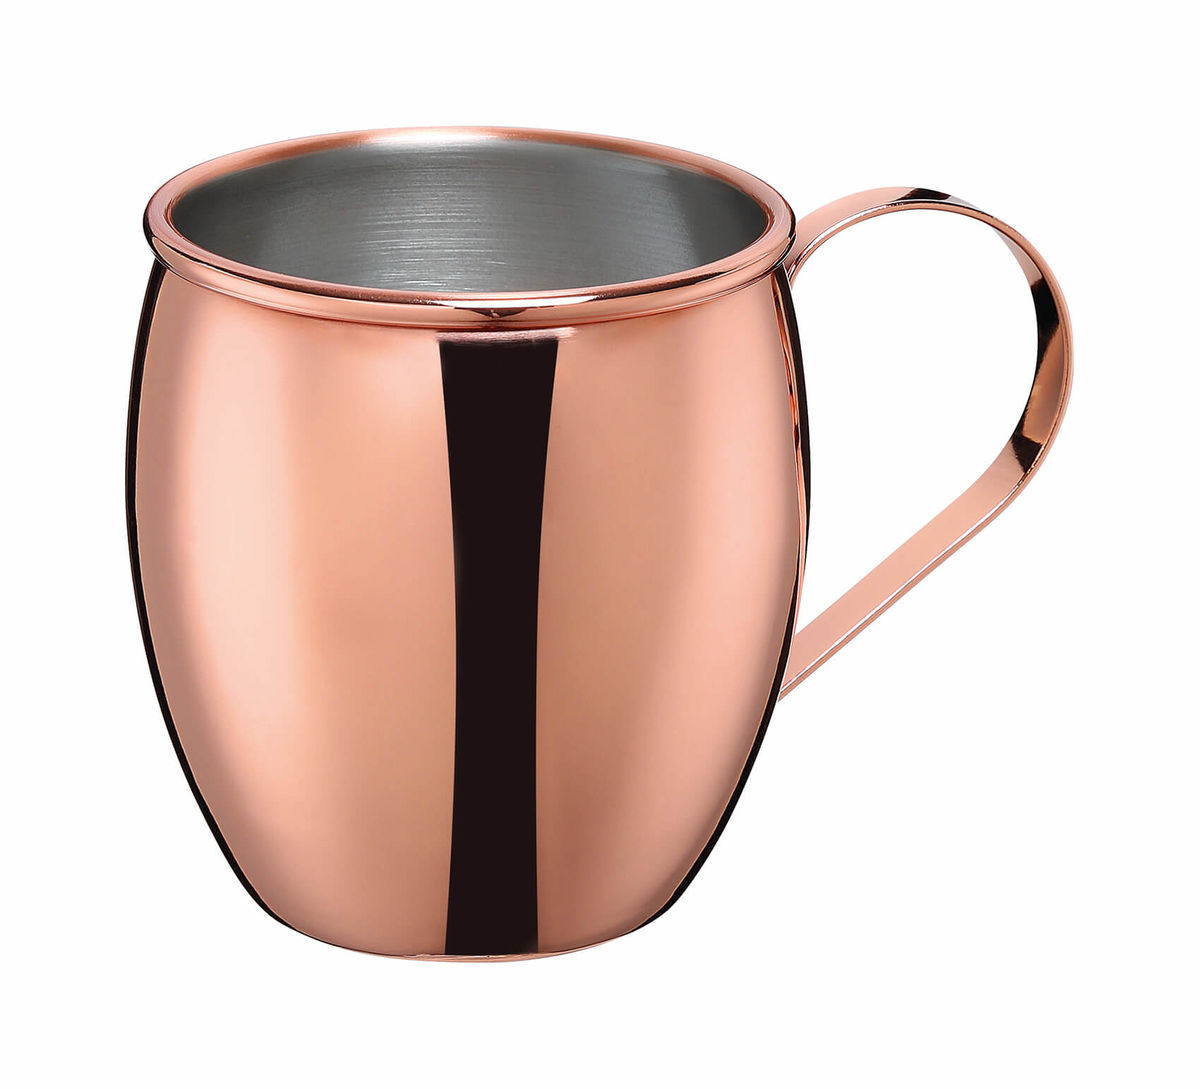 Image of Cilio Moscow Mule Becher 5 dl bei nettoshop.ch